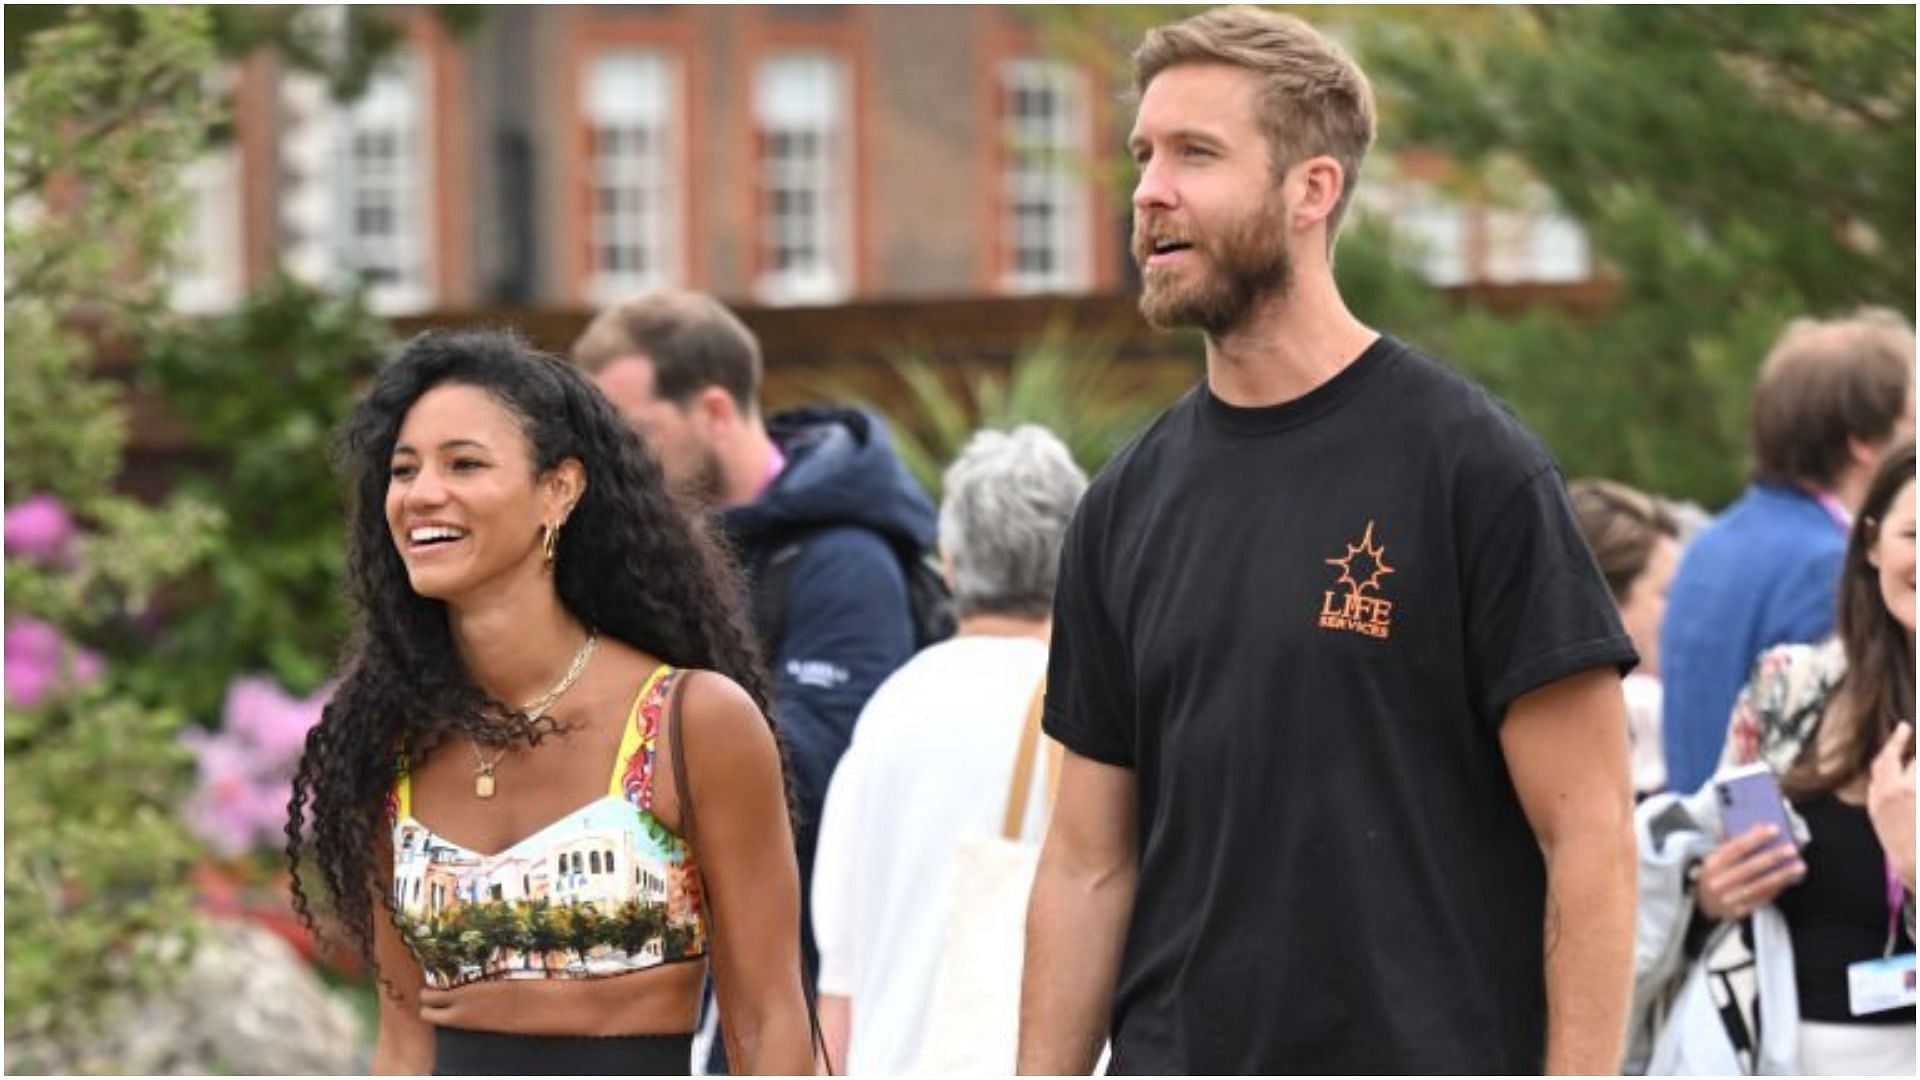 Calvin Harris and Vick Hope reportedly got engaged (Image via Karwai Tang/Getty Images)